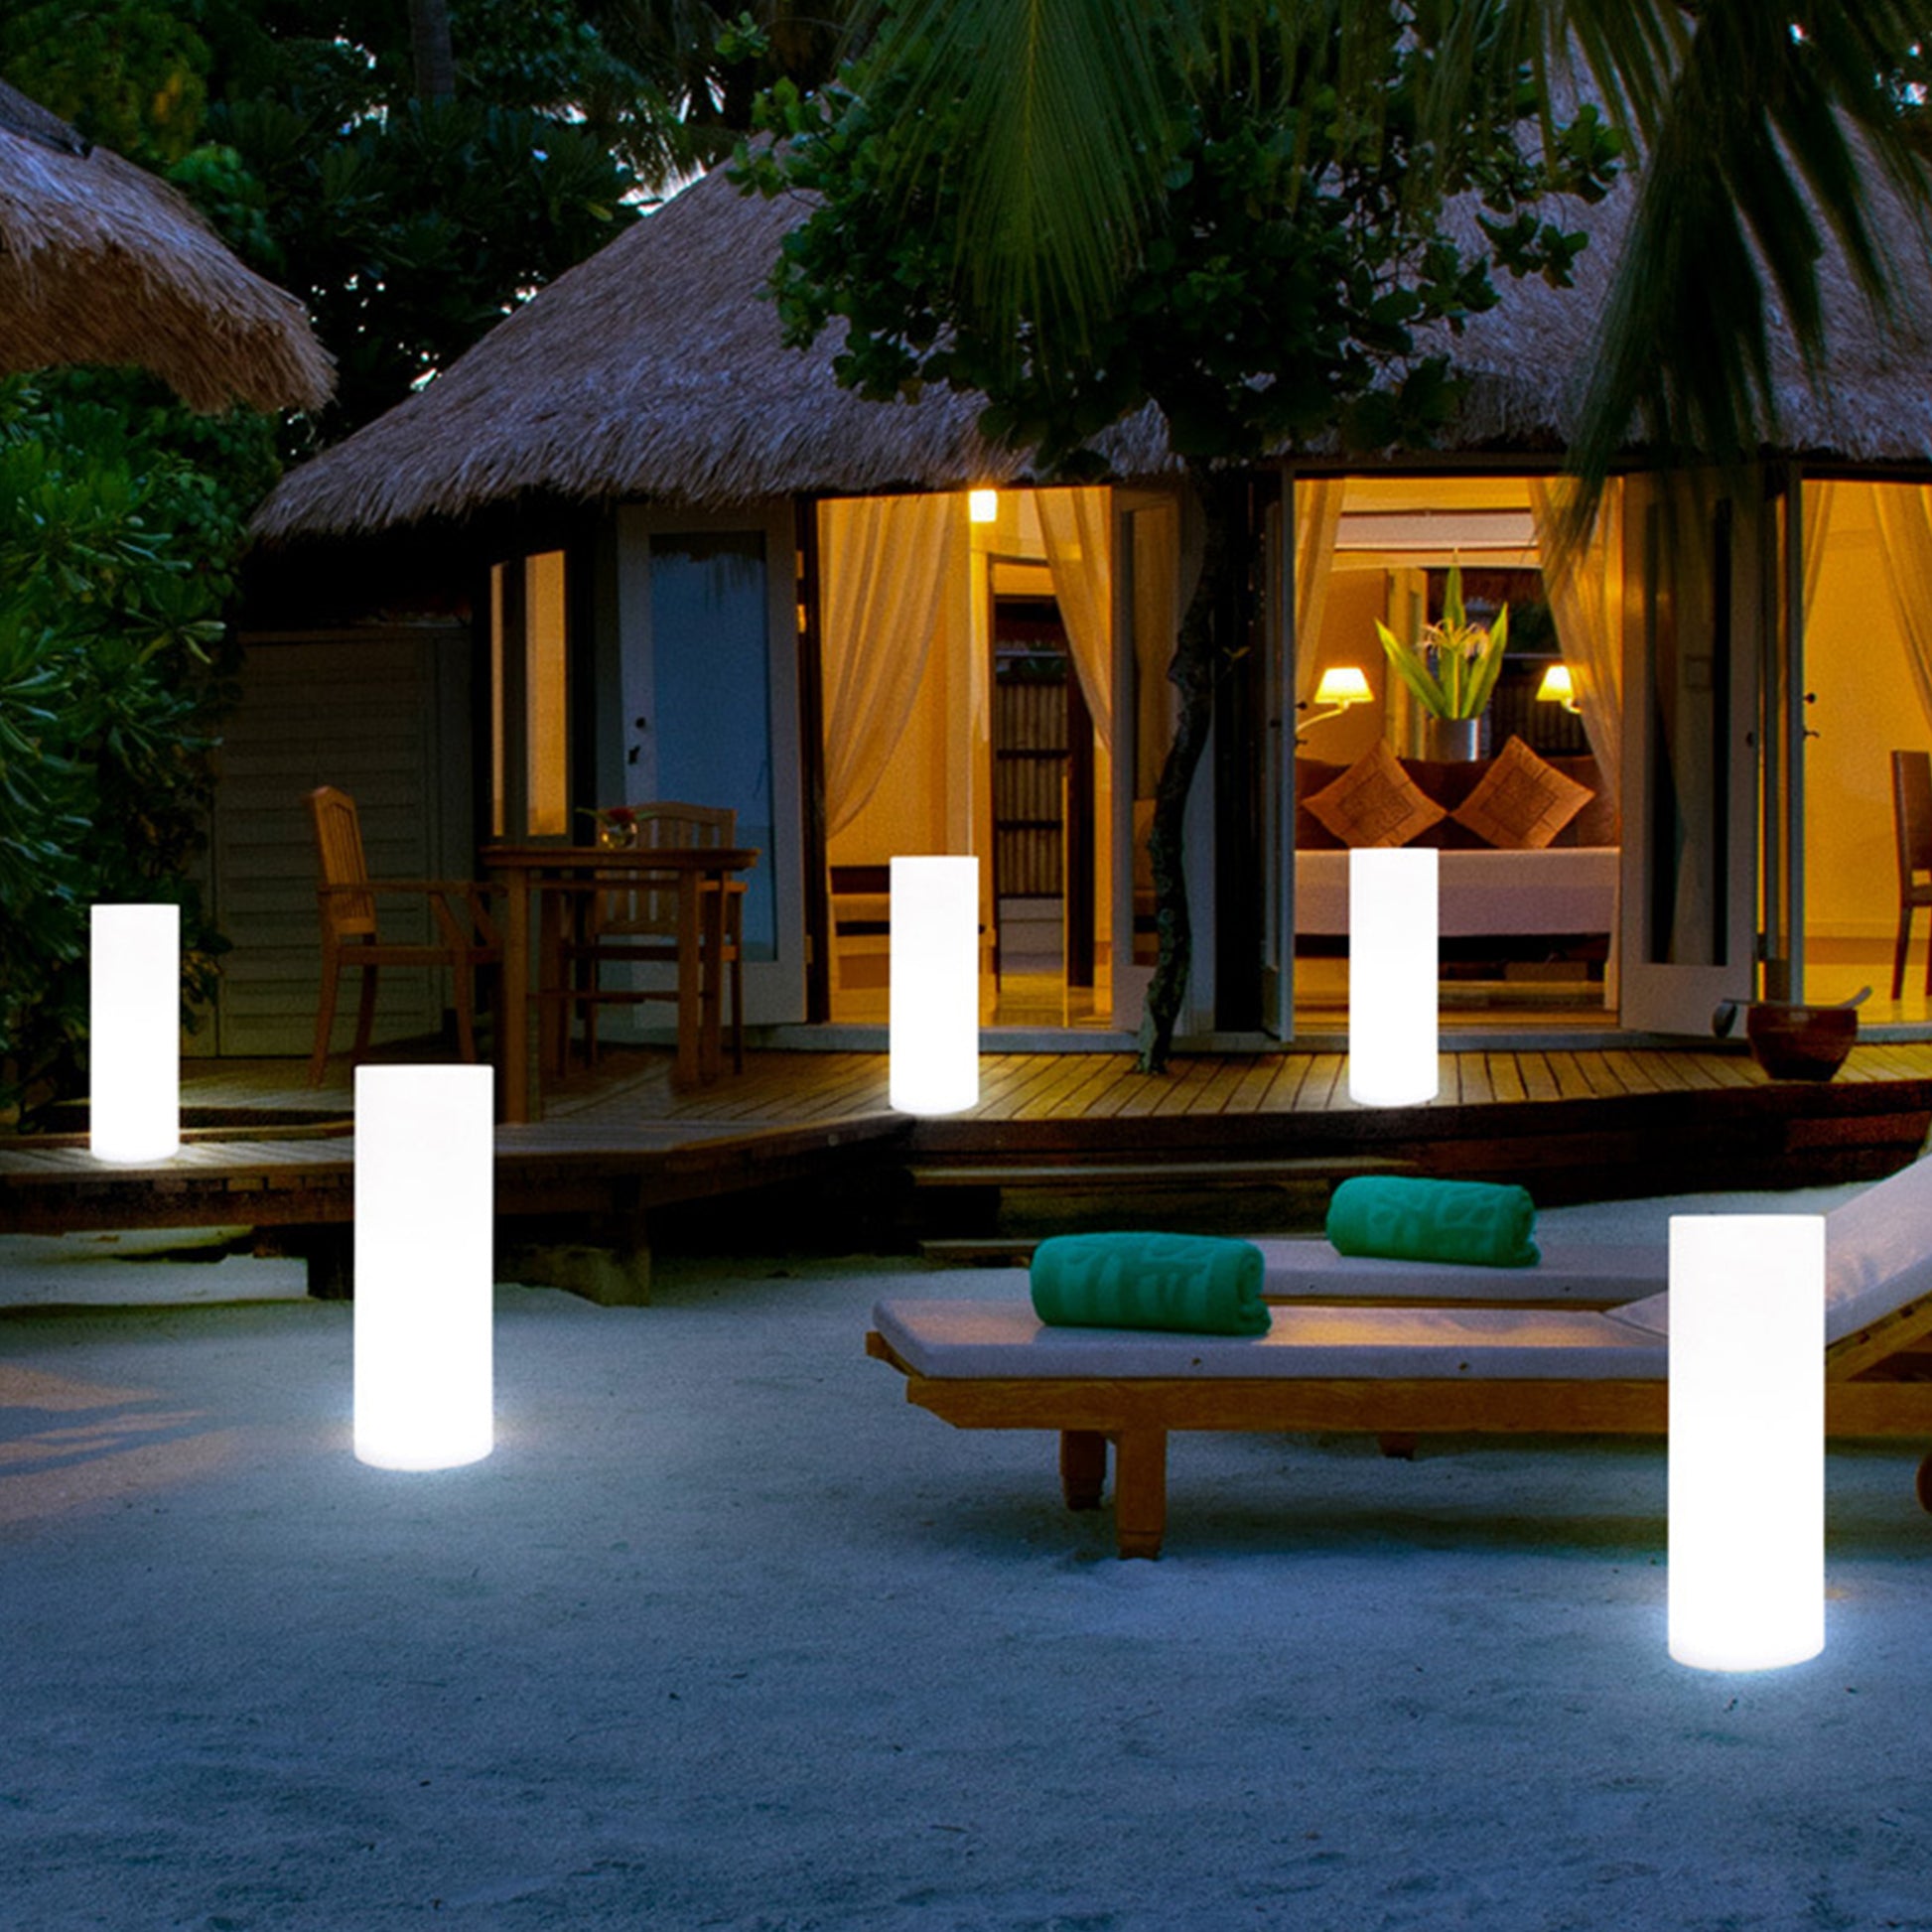 Waterproof Outdoor RGB Floor Lamp Dimmable with Remote Control, USB Chargeable LED Garden Lights Colour Changing Mood Light Round Shape - Buy Waterproof Outdoor RGB Floor Lamp Dimmable with Remote Control, USB Chargeable LED Garden Lights Colour Changing 